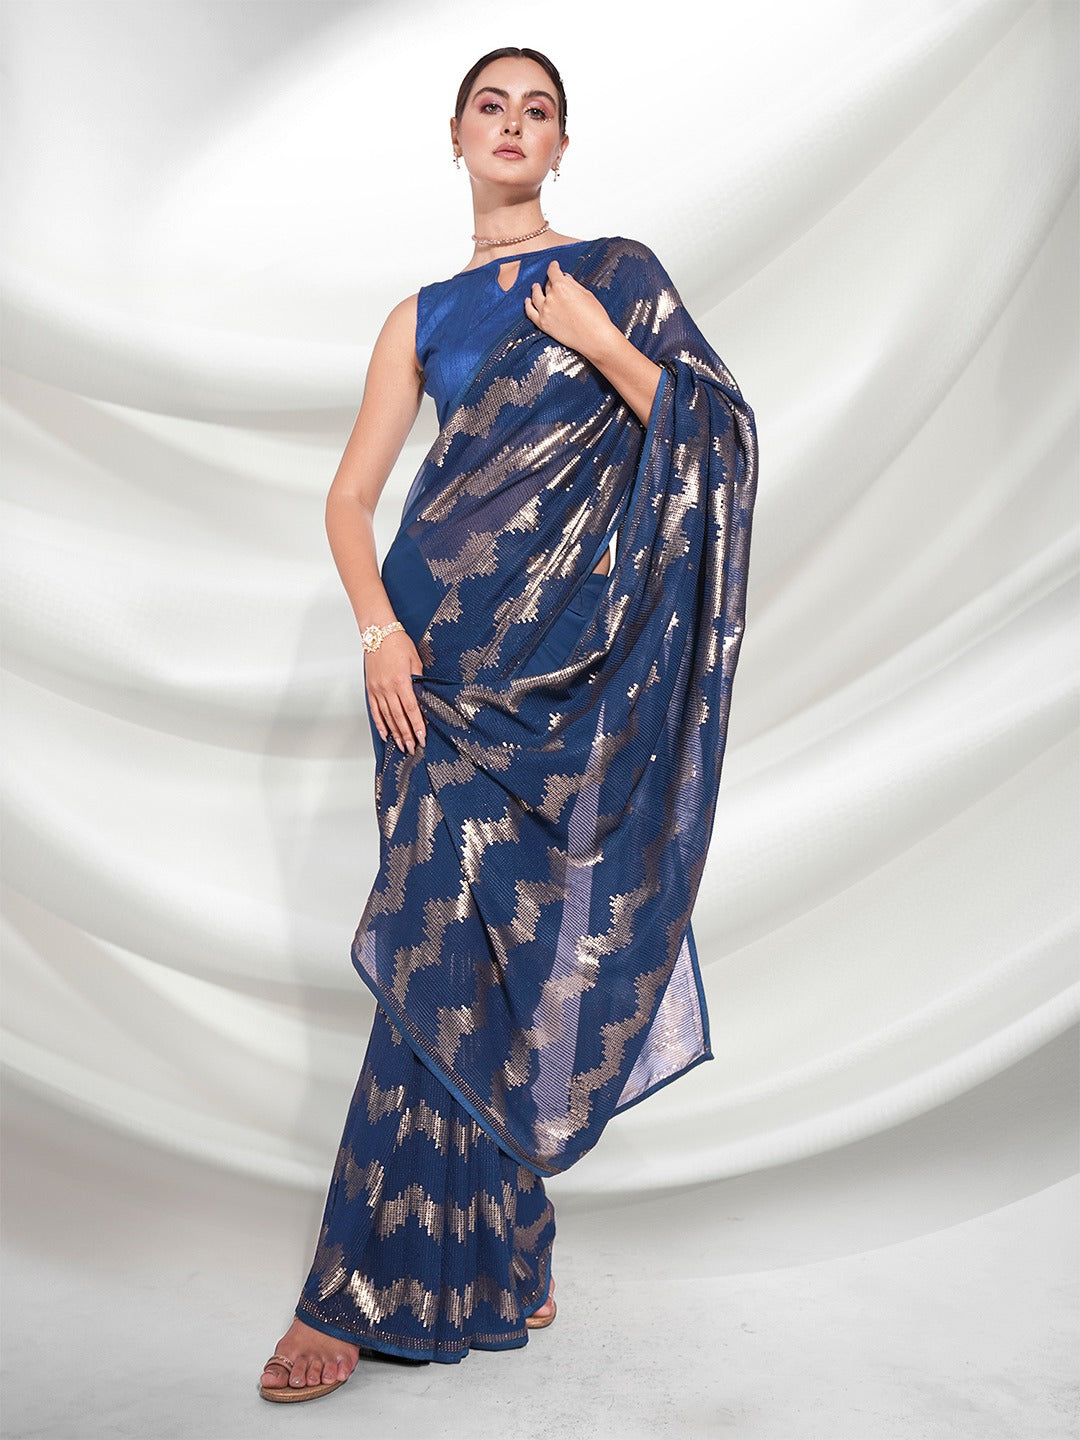 Beautiful Teal Blue Matt Sequence Embroidery Work With Zigzag Pattern with Sikorsky Diamond Border With Box Piping Saree For Women